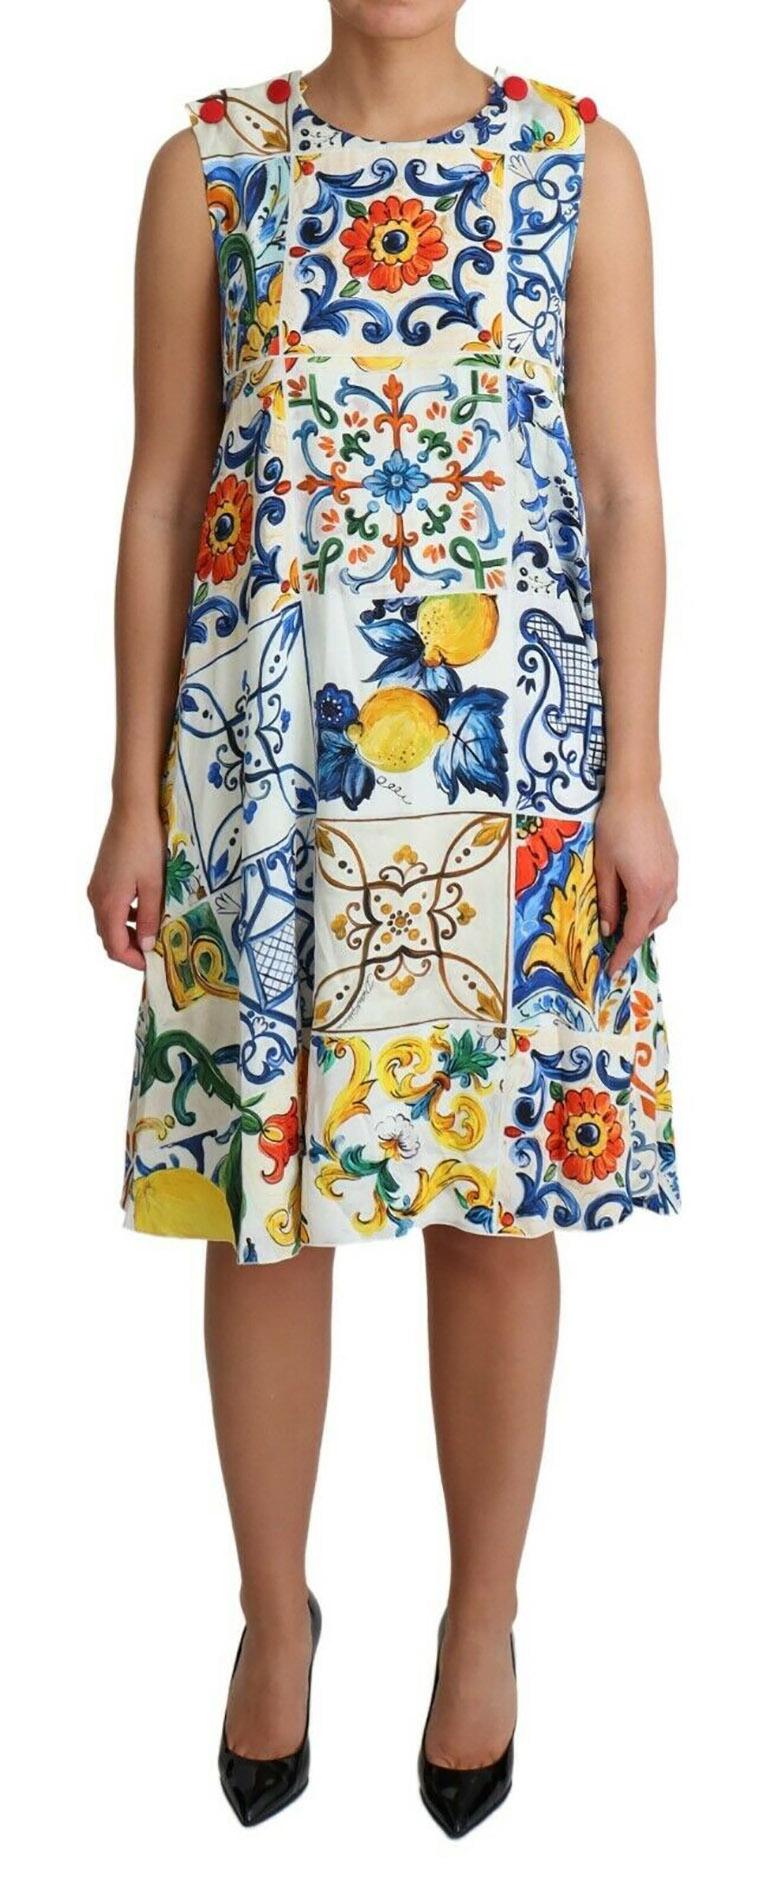 Gorgeous brand new with tags, 100% Authentic Dolce & Gabbana silk sleeveless dress with majolica print.

Model: Knee length dress

Color: White majolica print

Zipper closure on the back

Logo details
White silk stretch inner lining

Made in